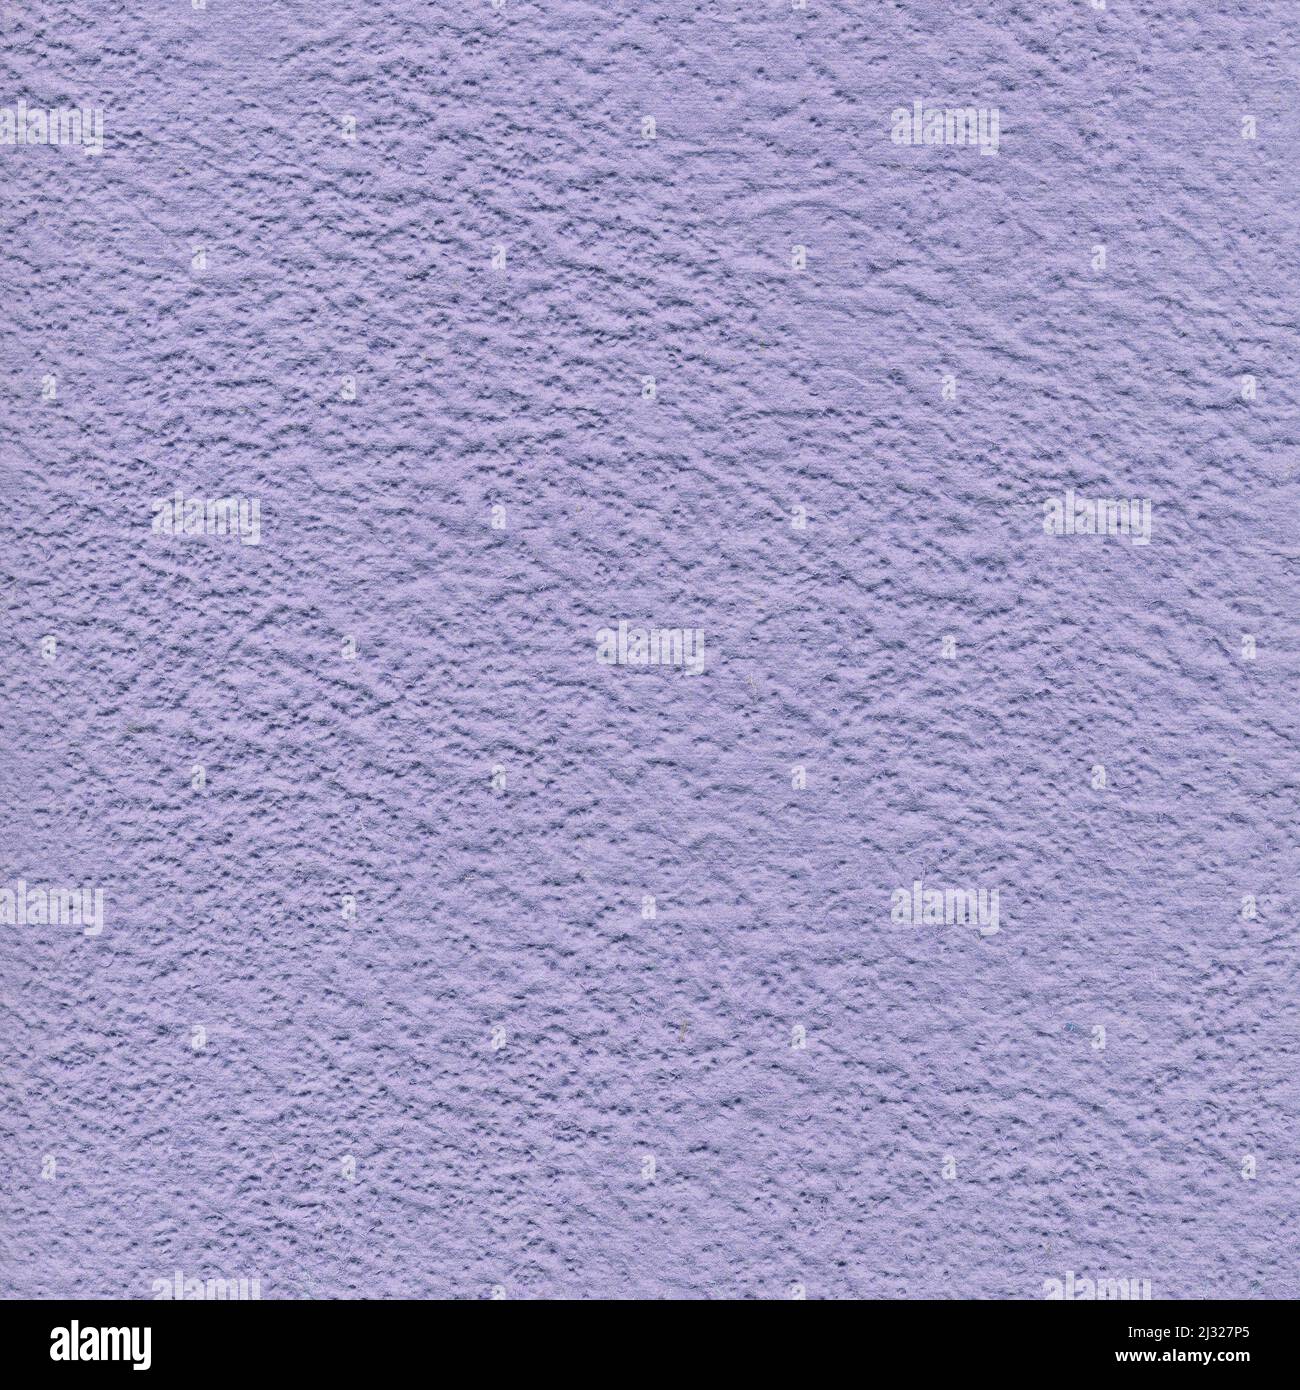 Lilac paper background with pattern Stock Photo